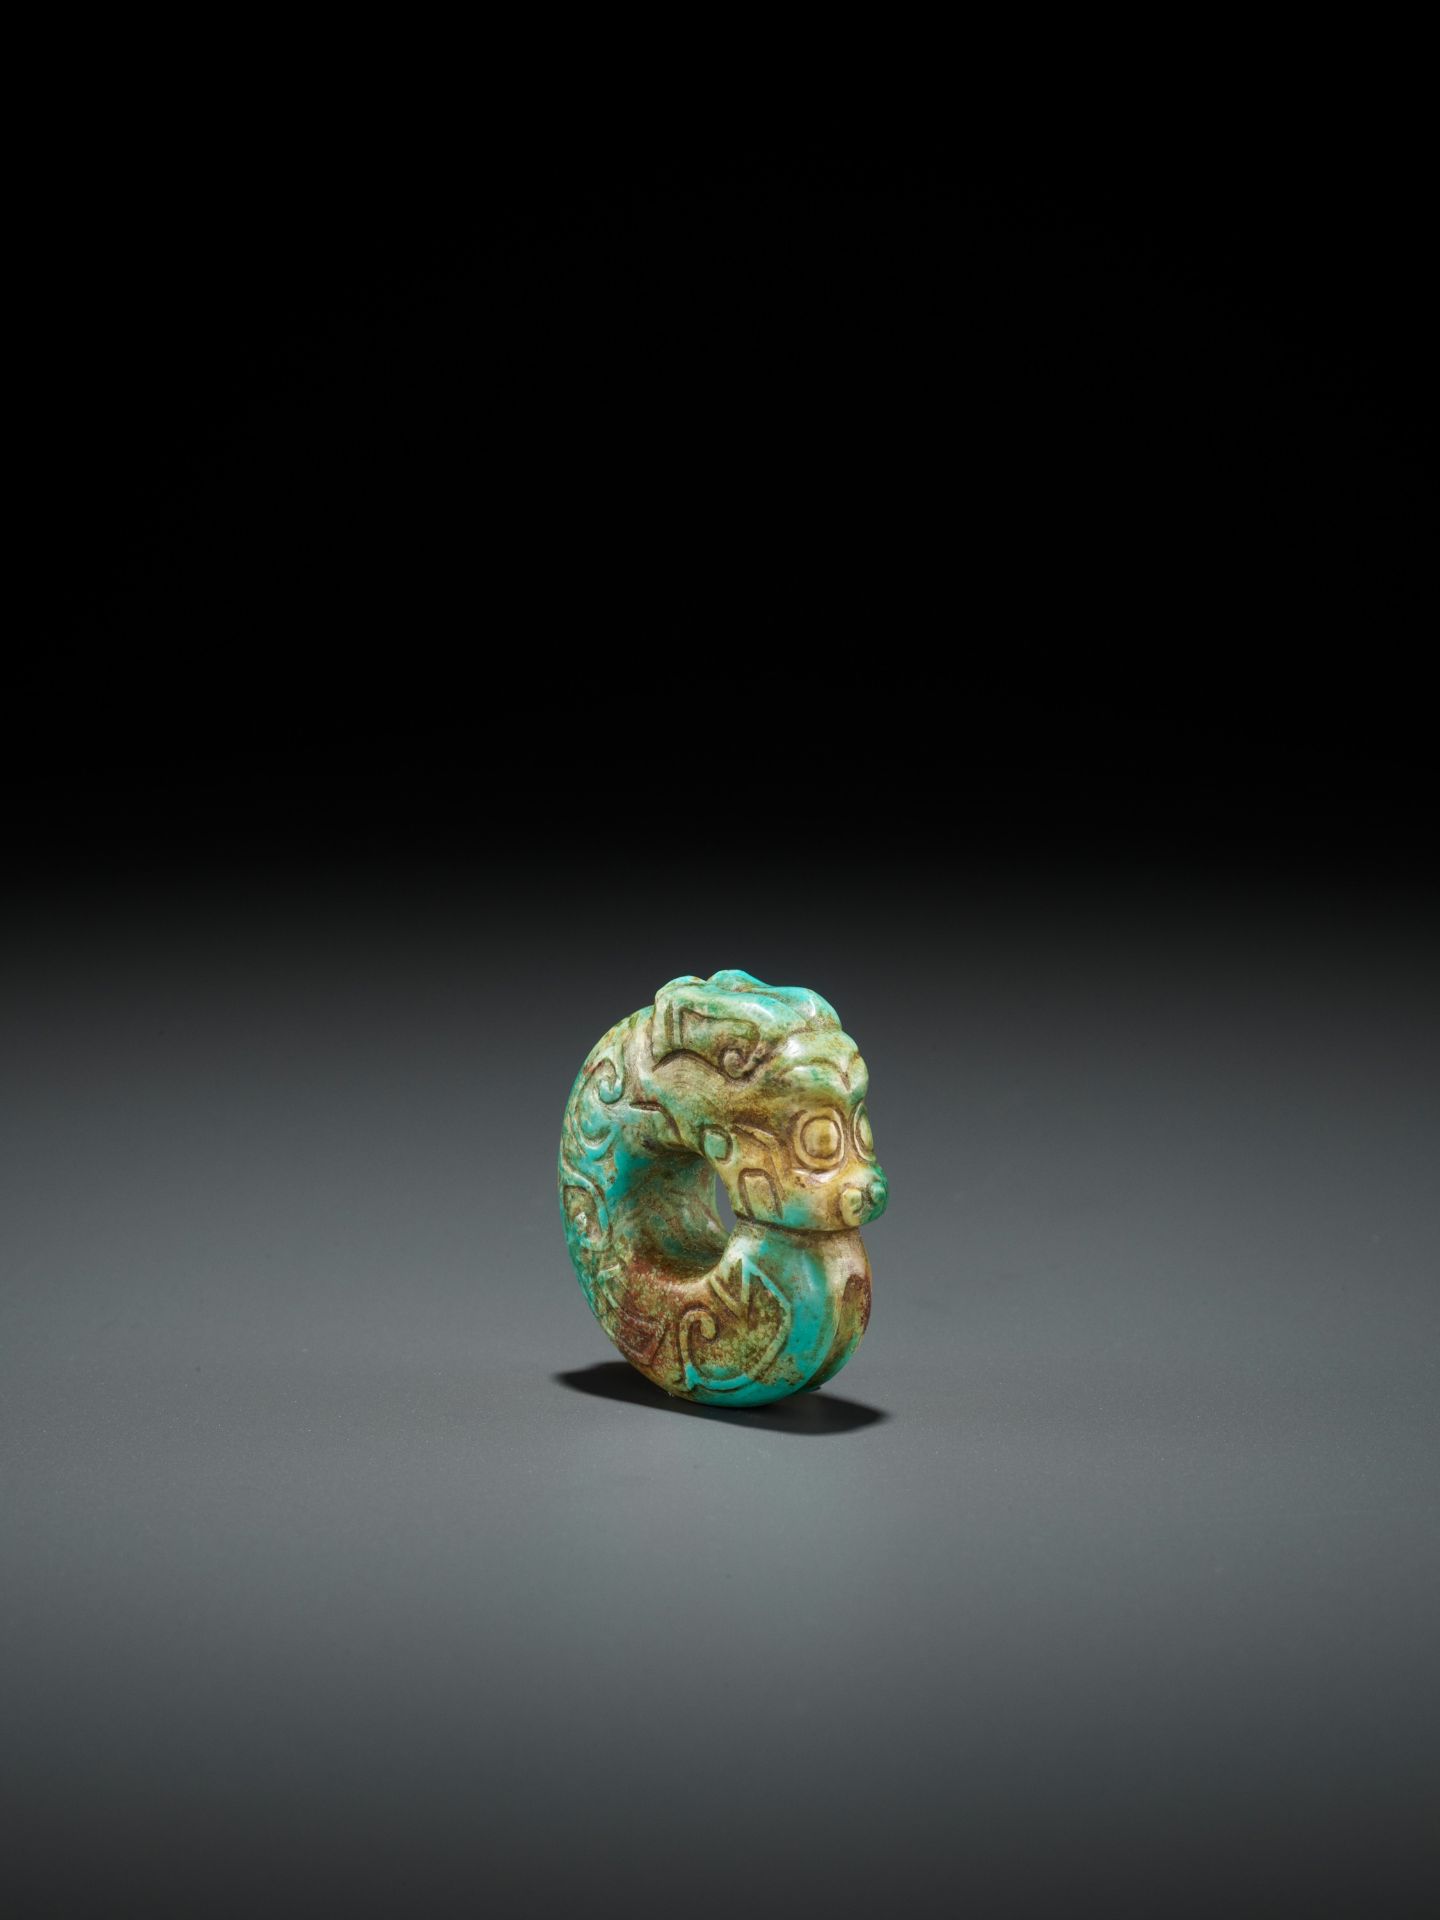 A TURQUOISE MATRIX 'PIG-DRAGON' PENDANT, SHANG TO WESTERN ZHOU DYNASTY - Image 3 of 14